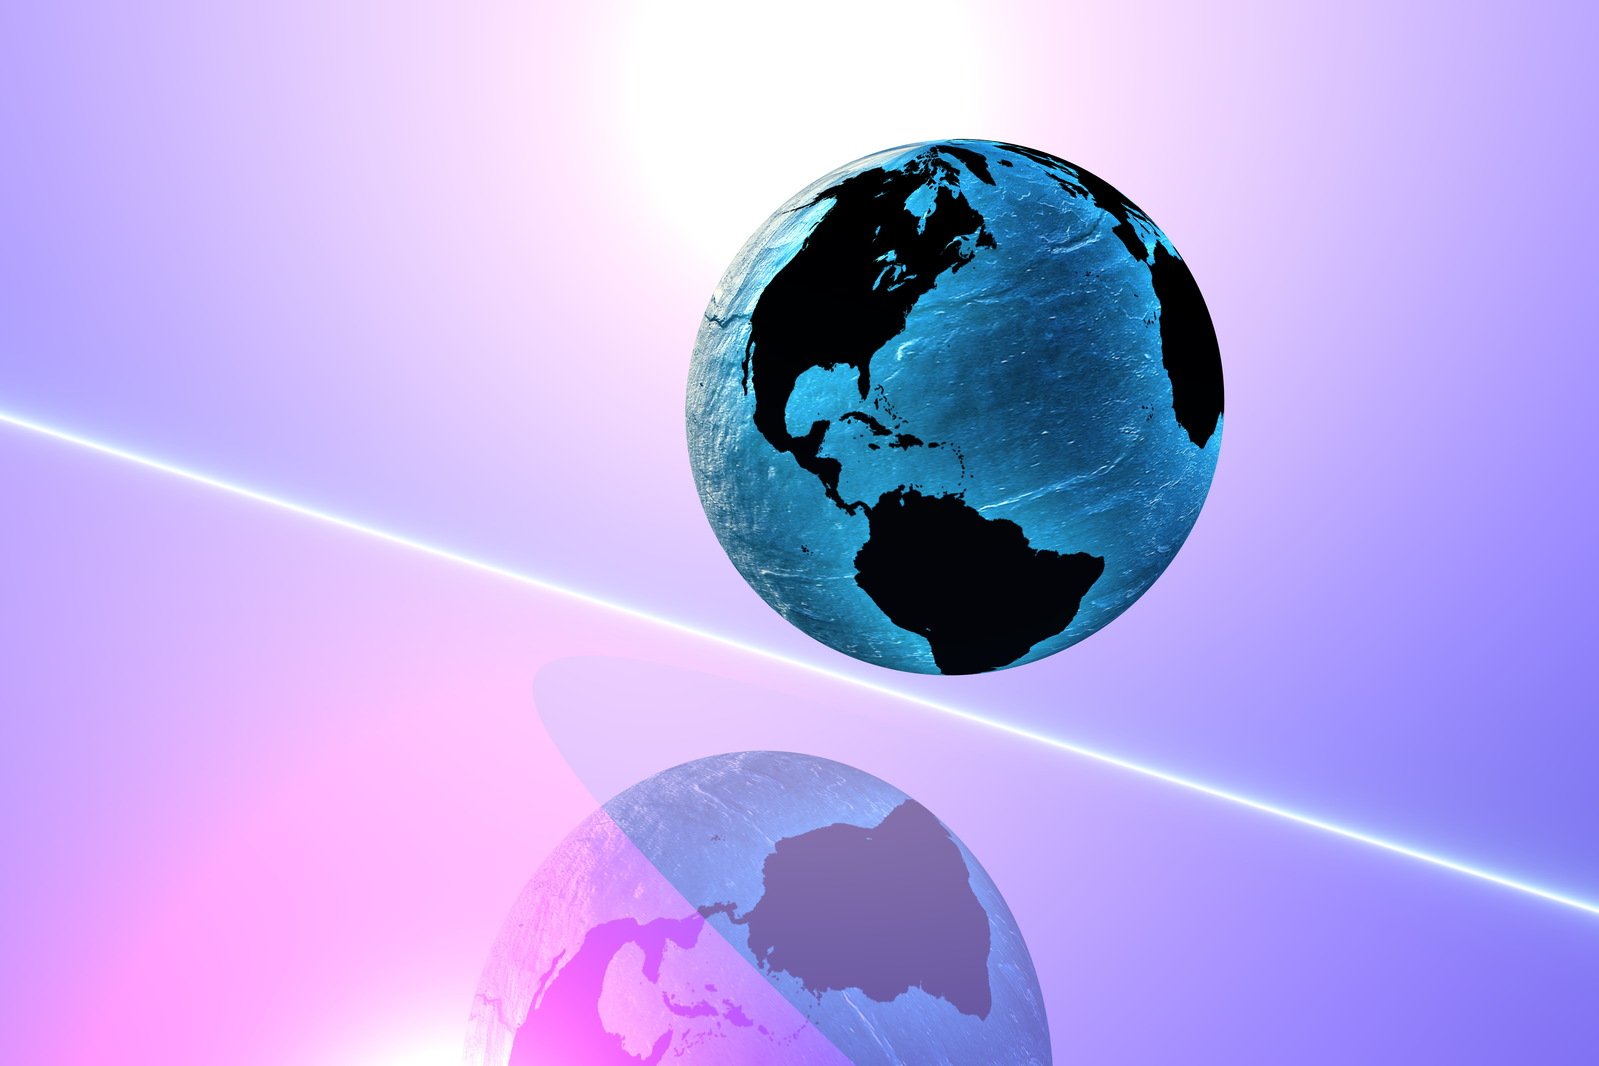 two different images show a small globe with a pink and blue reflection